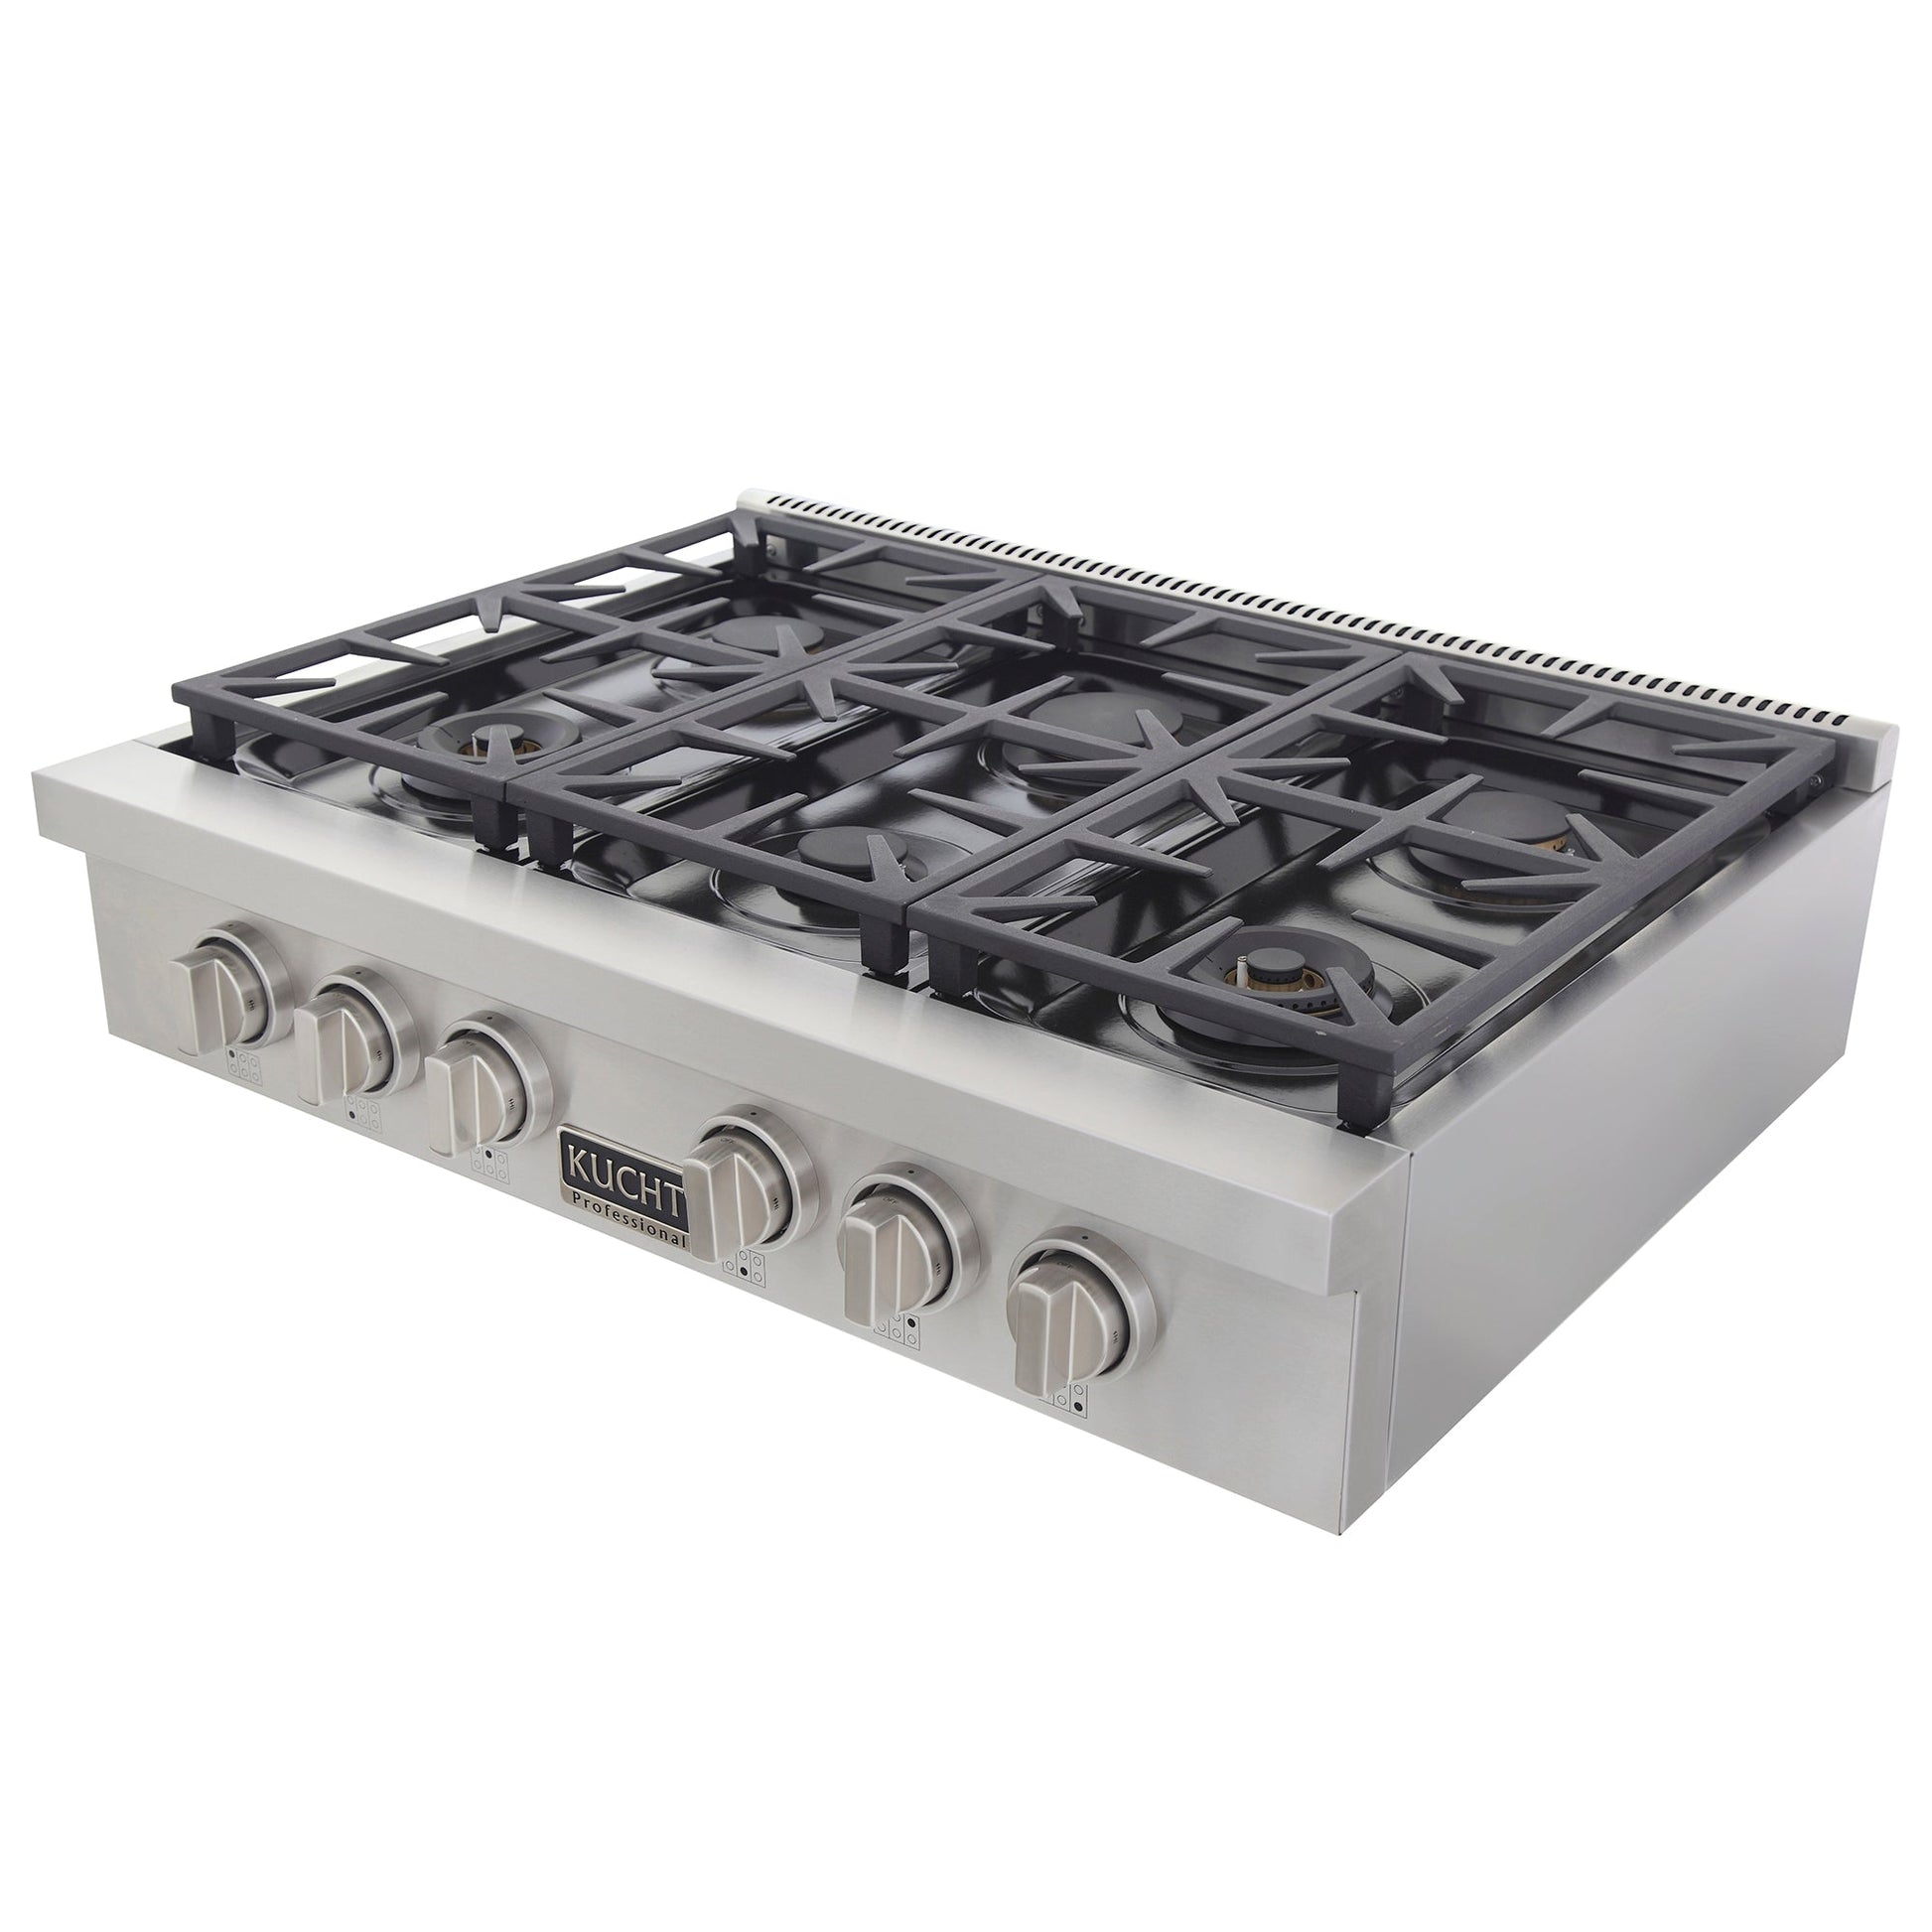 Kucht KFX Series 36" Natural Gas Range-Top With 6 Burners and Classic Silver Knobs